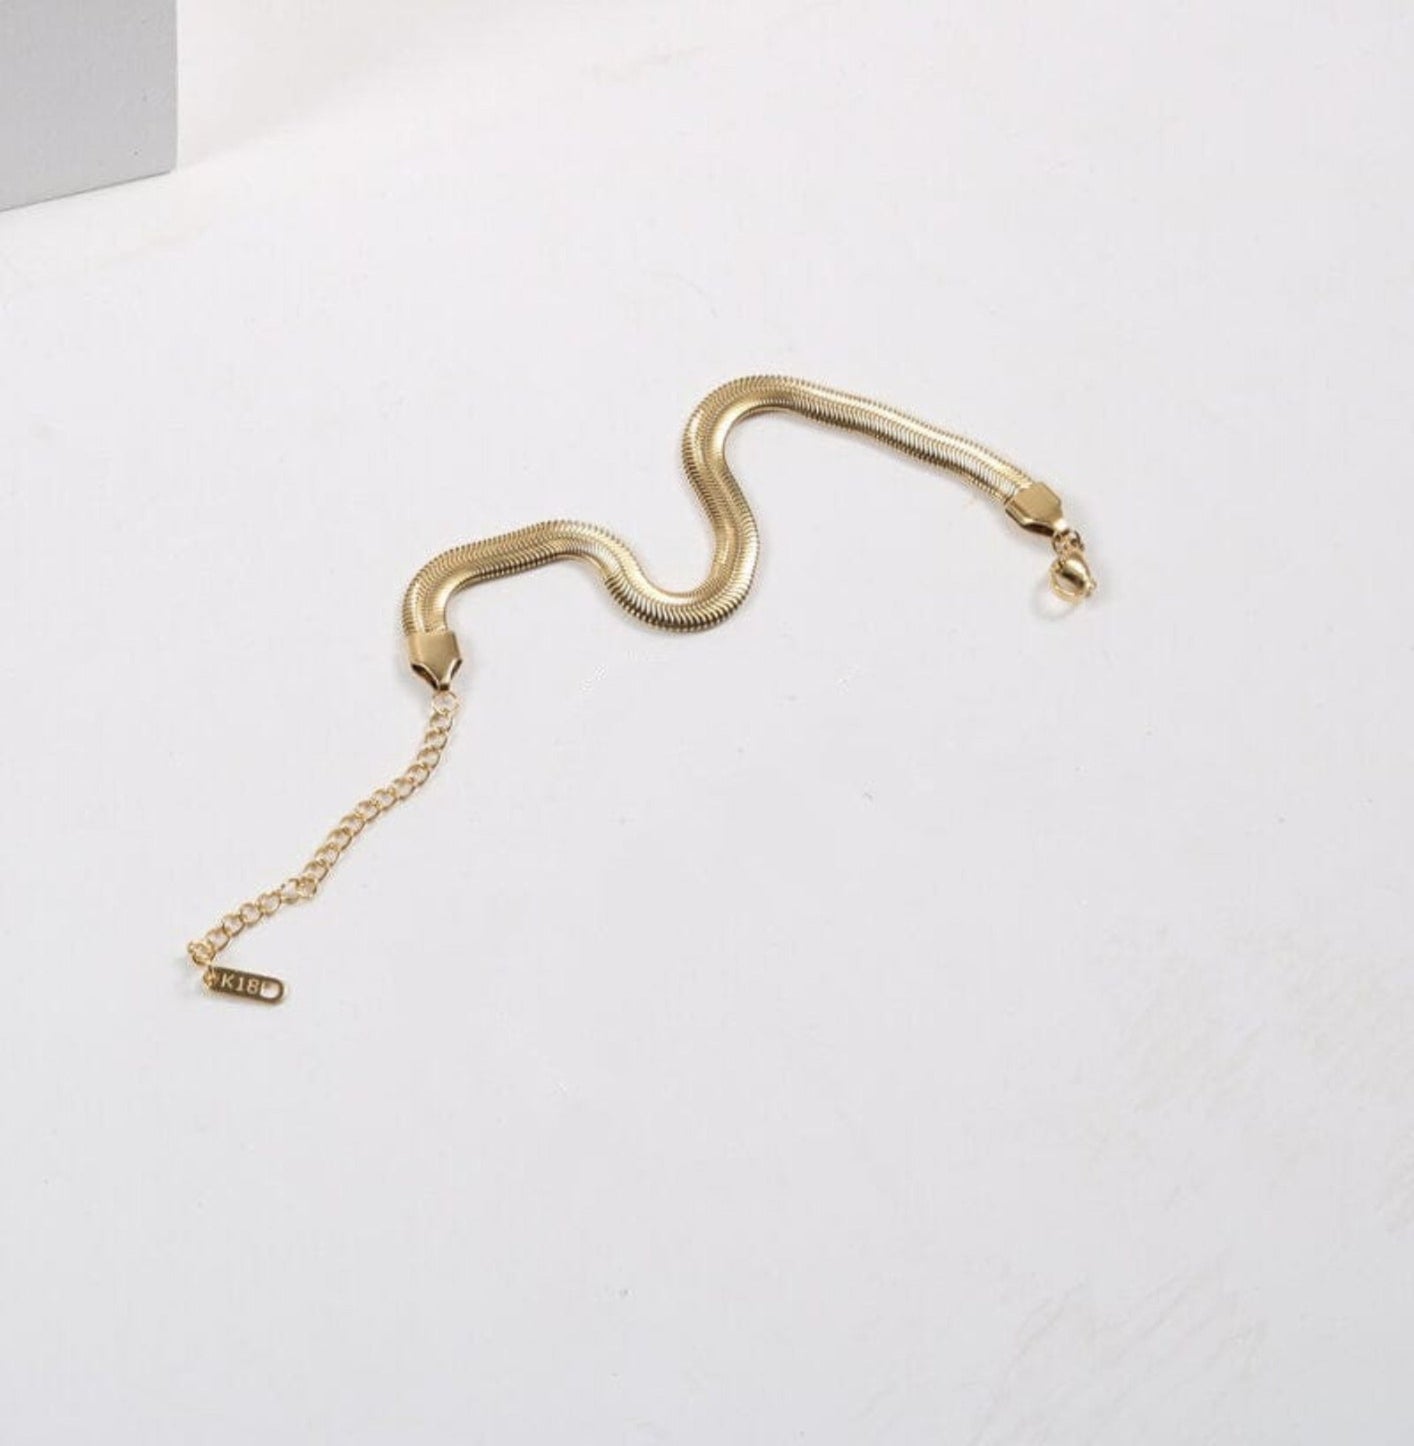 SNAKE CHAIN BRACELET braclet Yubama Jewelry Online Store - The Elegant Designs of Gold and Silver ! 6mm 16cm 